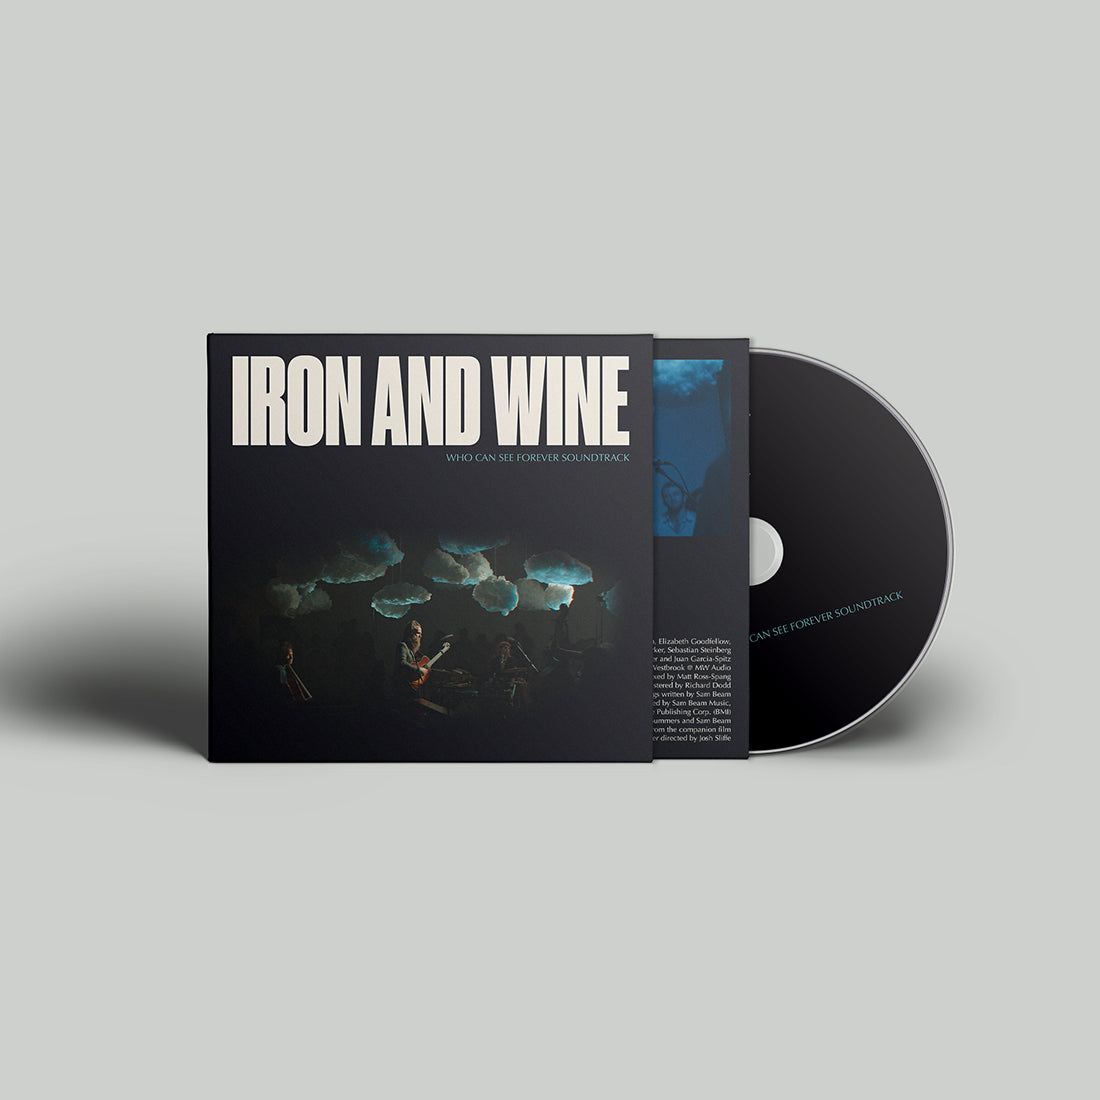 Iron and Wine - Who Can See Forever (Soundtrack): CD